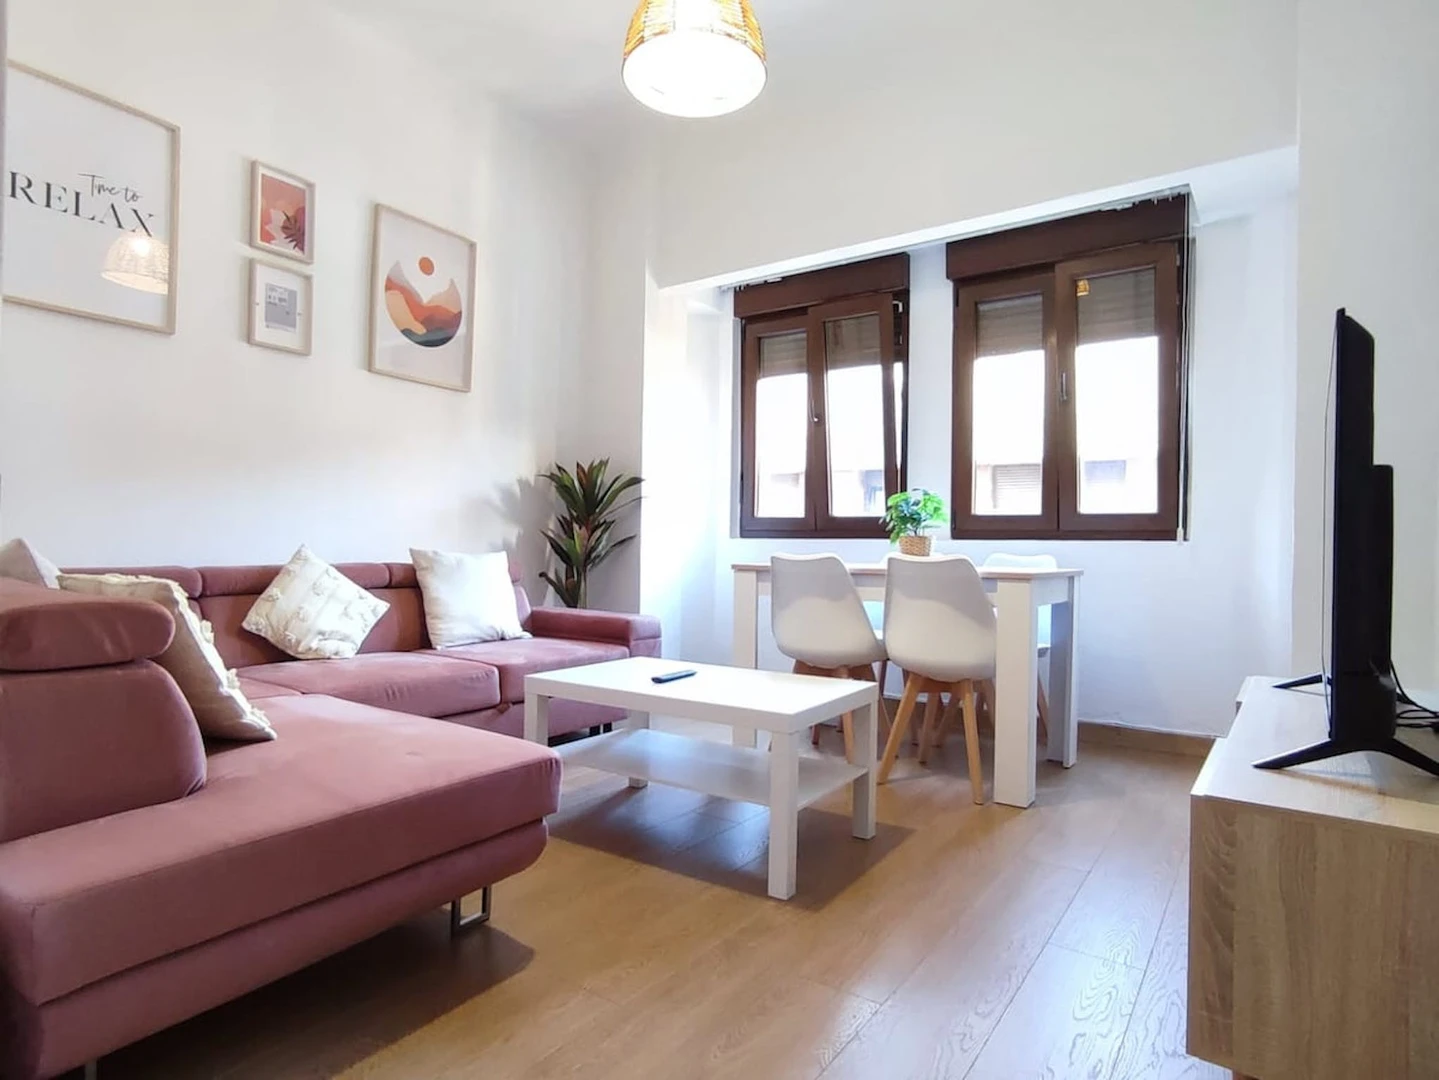 Accommodation with 3 bedrooms in gijon